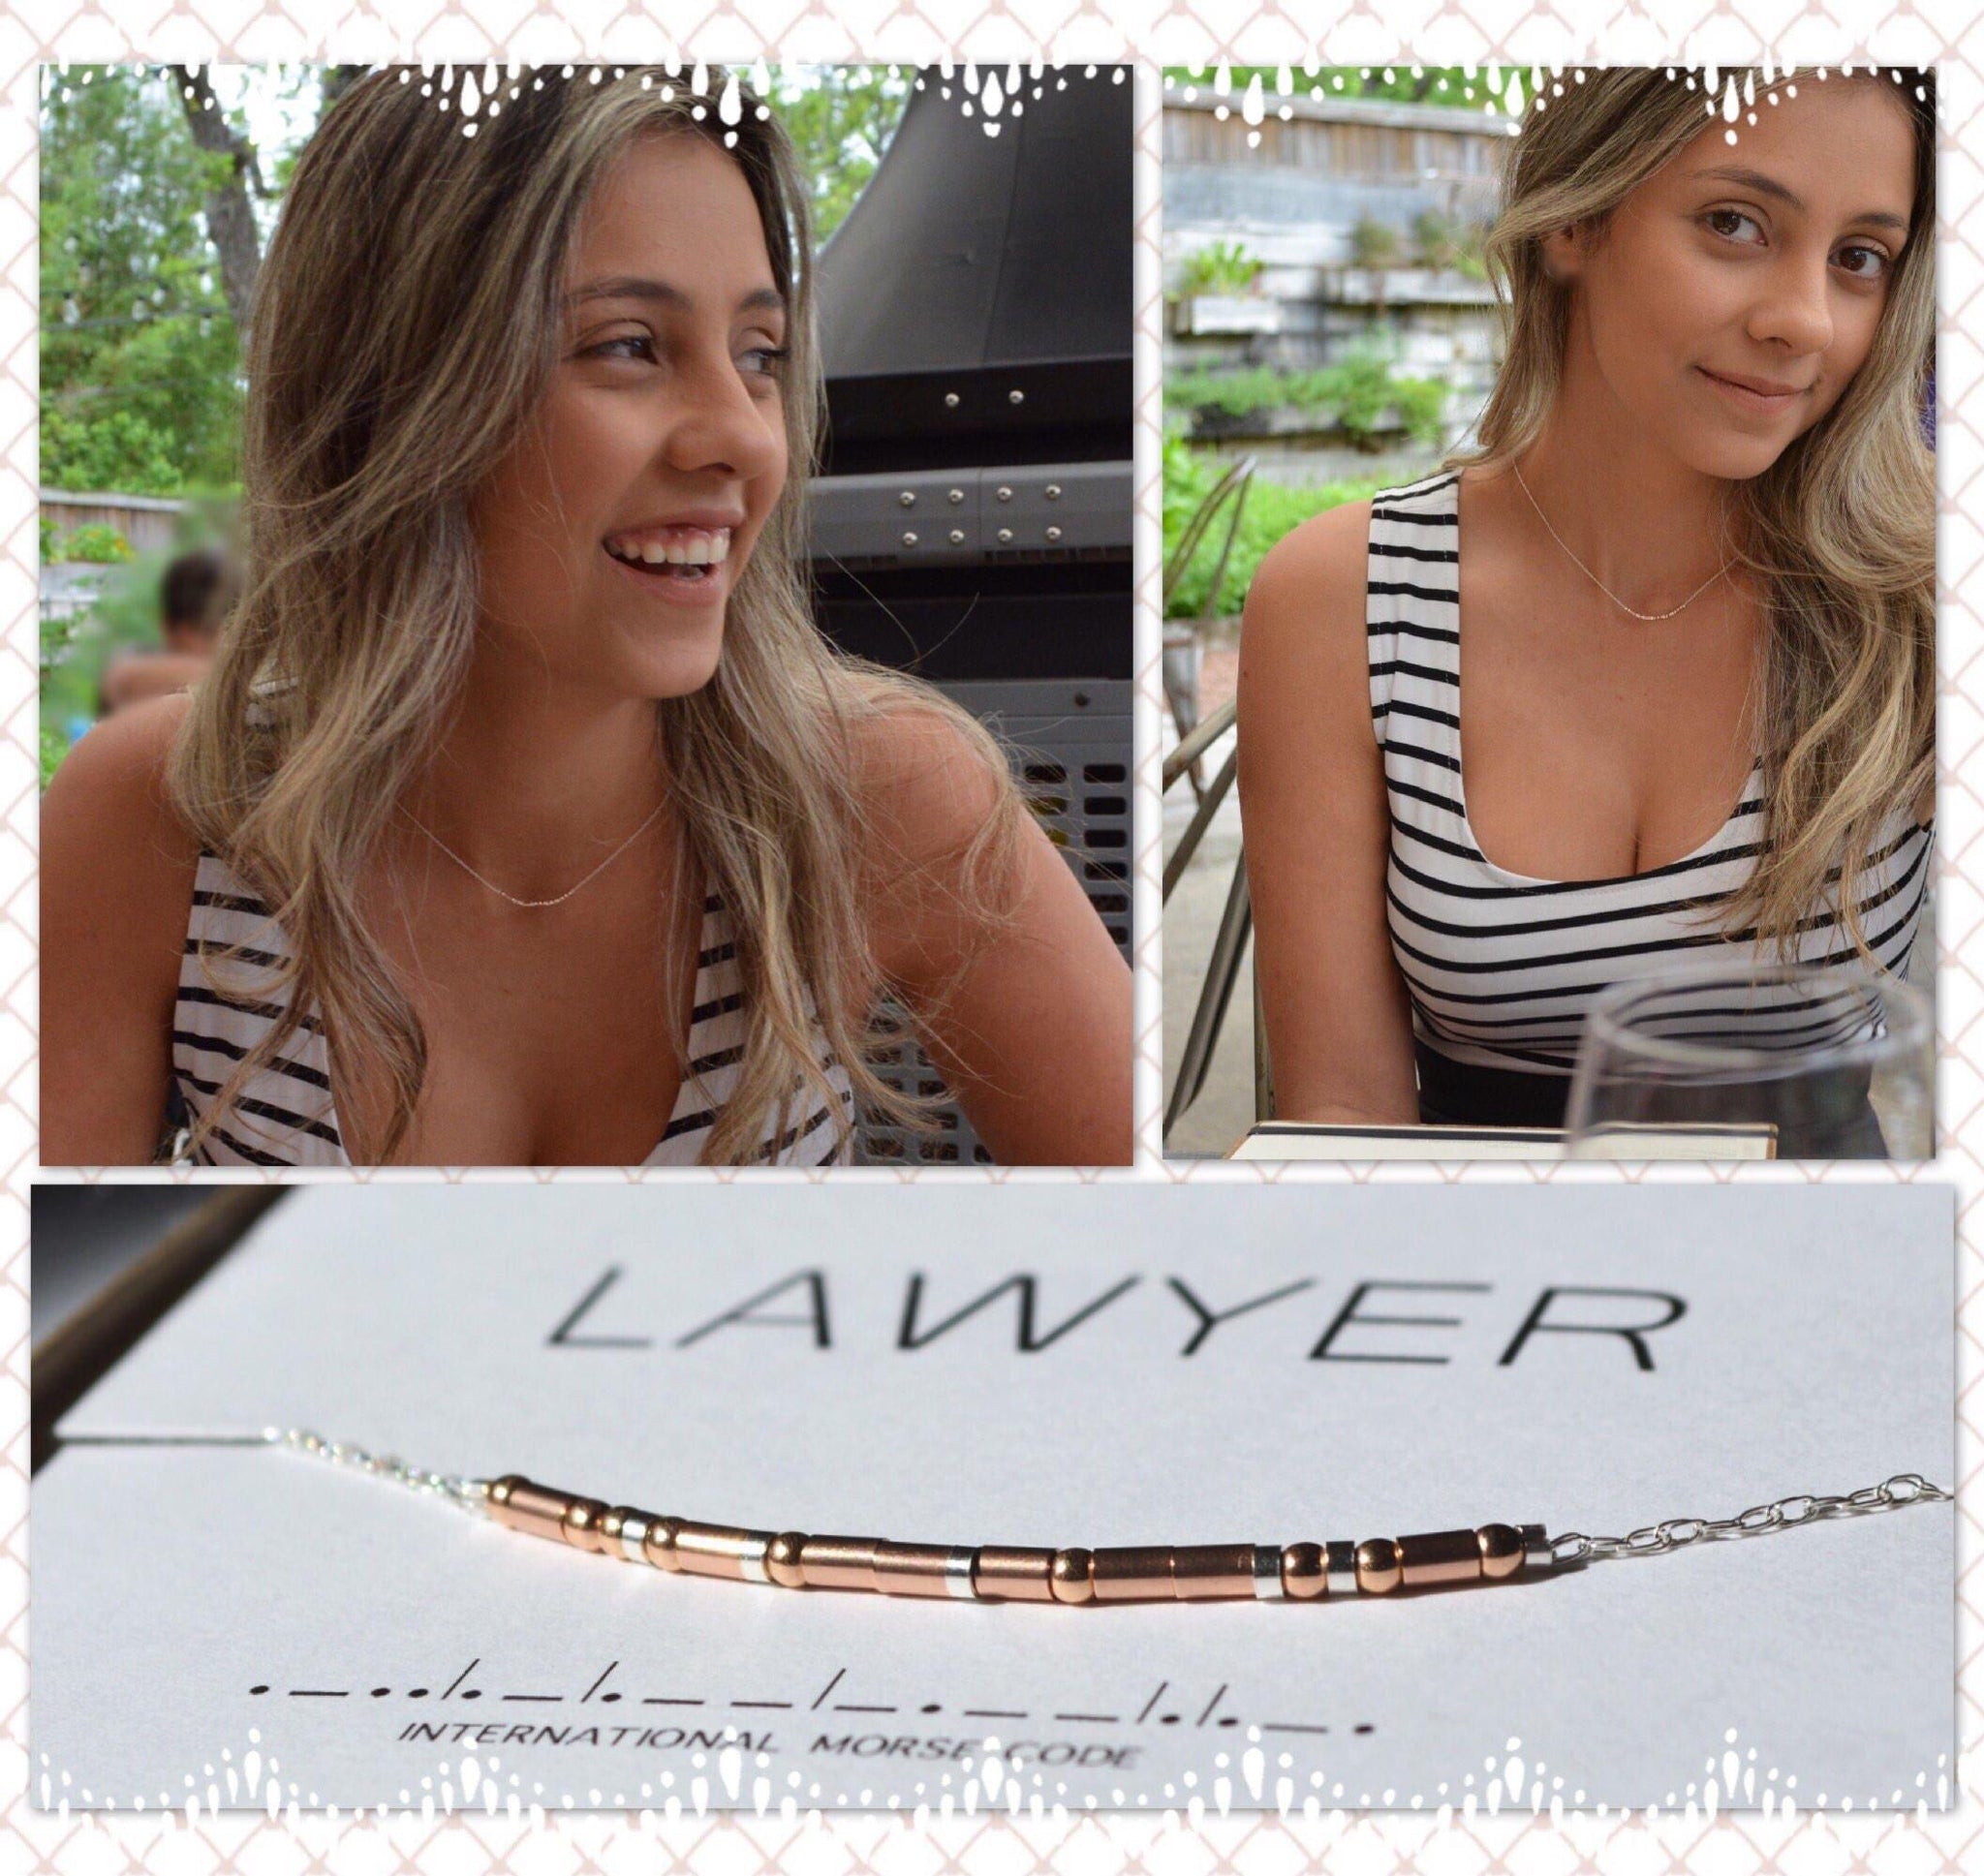 Law School Graduation Gift • Morse Code Lawyer Silver Chain Necklace / Grad Gift / Morivation Dreams & Goals Lawyer Law Student Attorney - Morse and Dainty